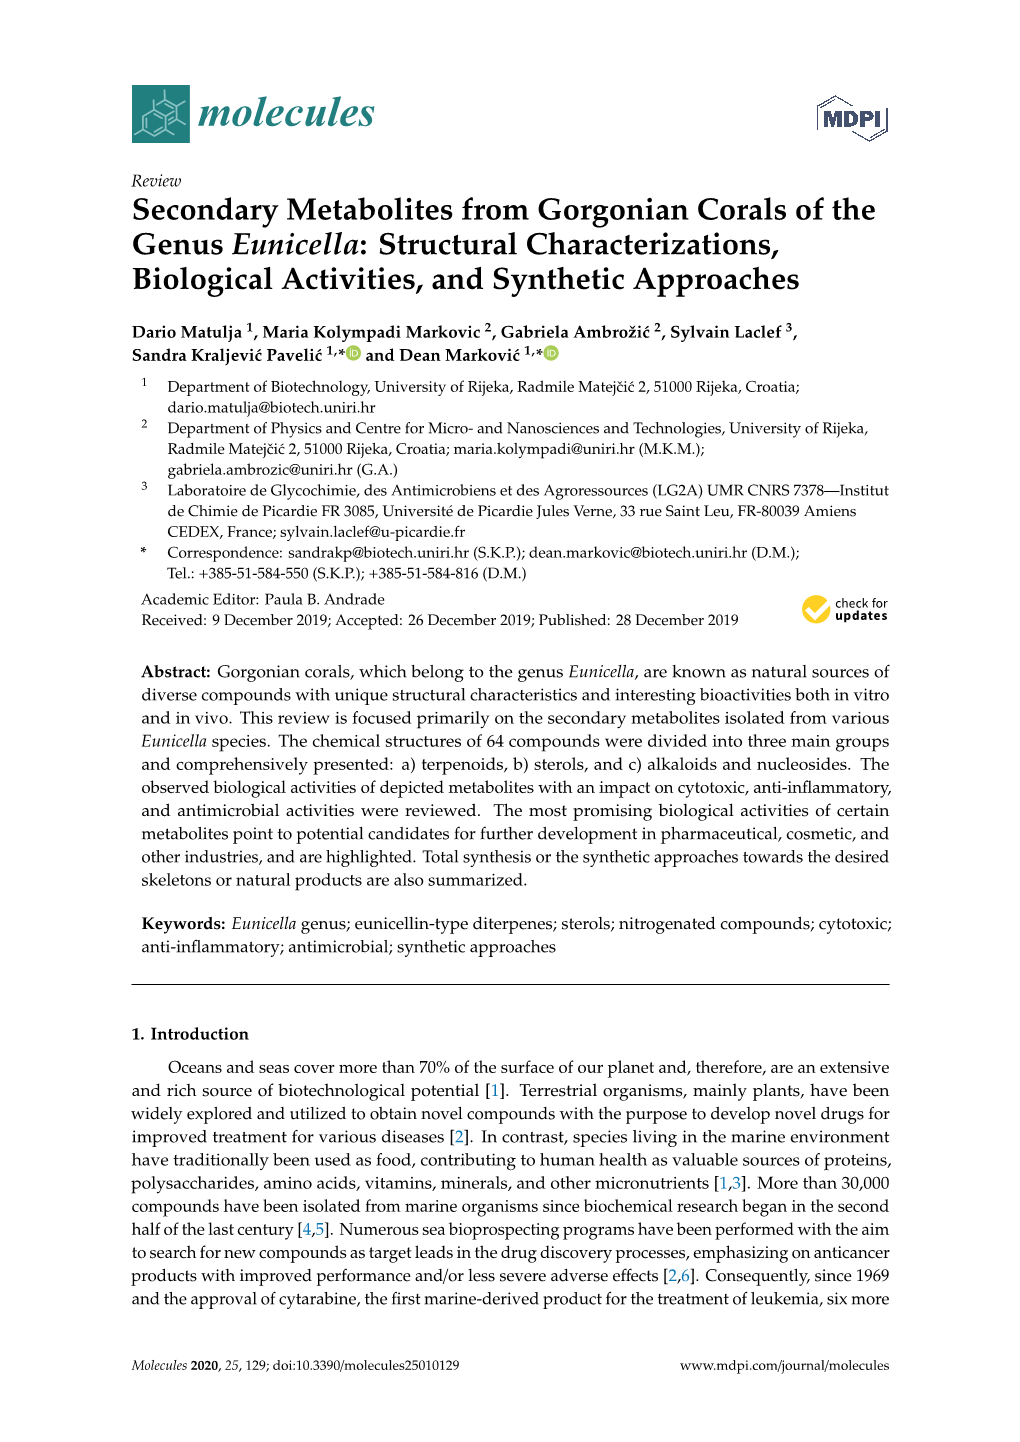 Secondary Metabolites from Gorgonian Corals of the Genus Eunicella: Structural Characterizations, Biological Activities, and Synthetic Approaches